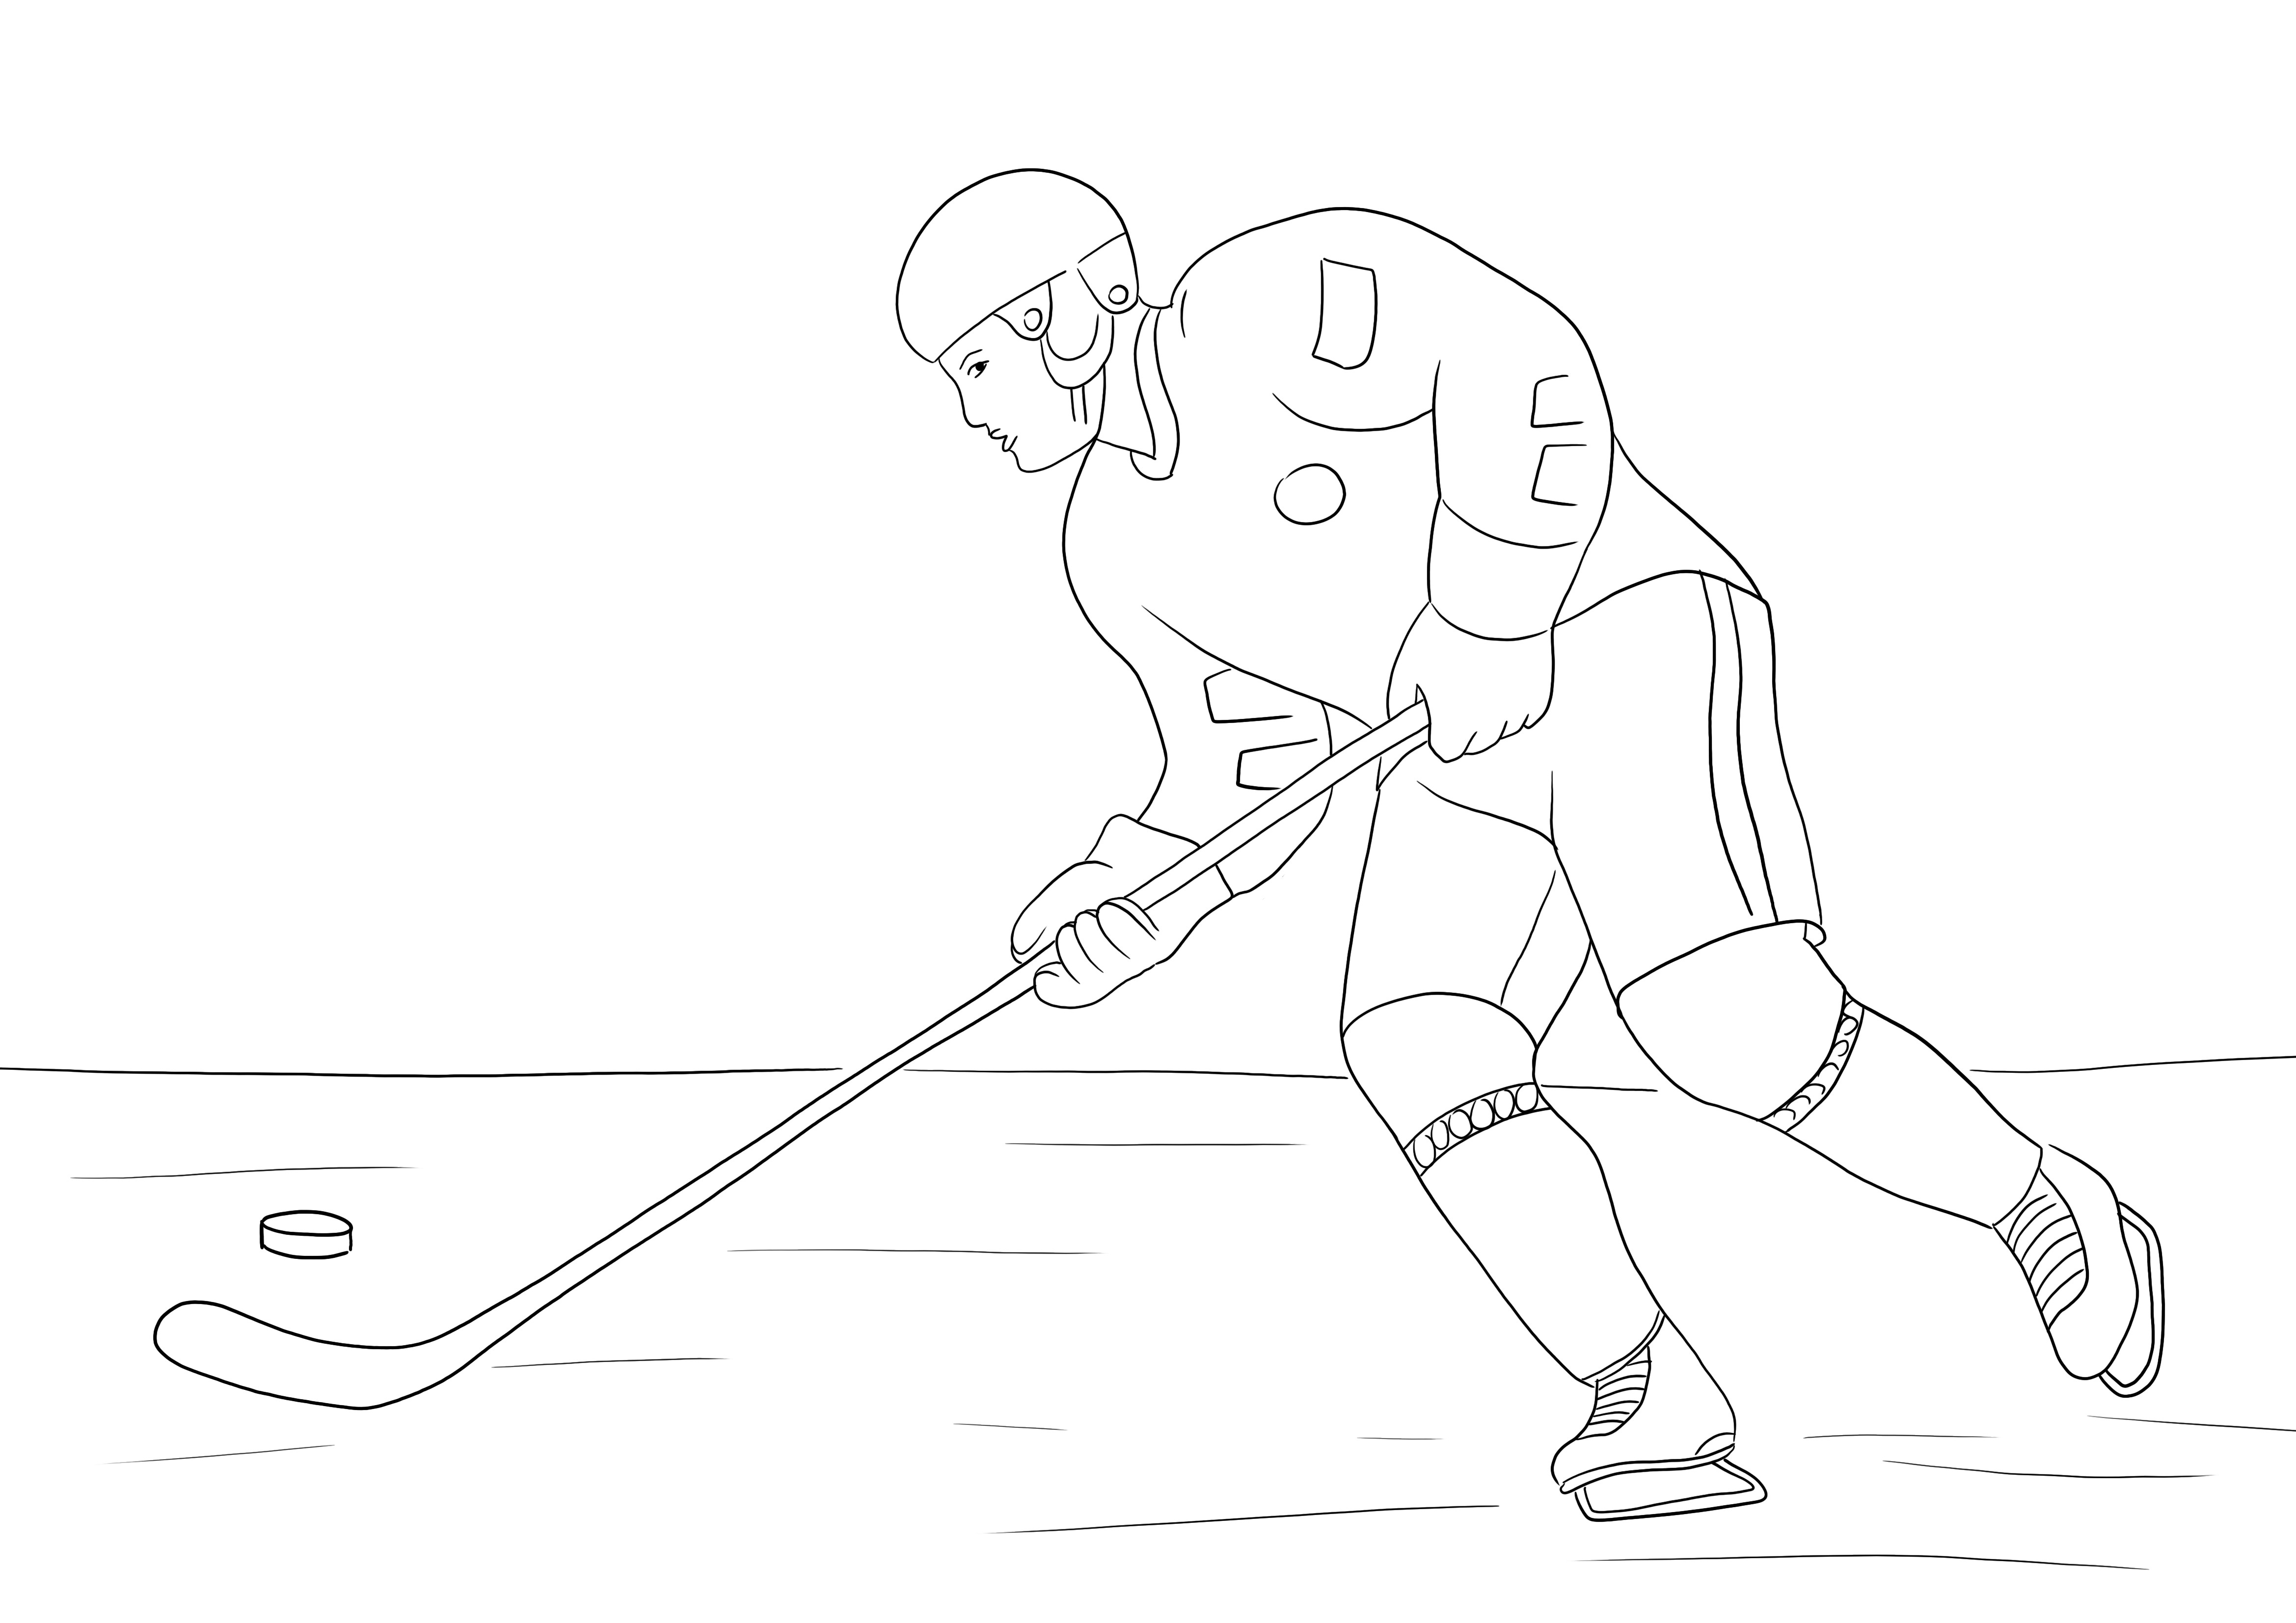 Easy and free downloading of Hockey Player to color and have fun for kids